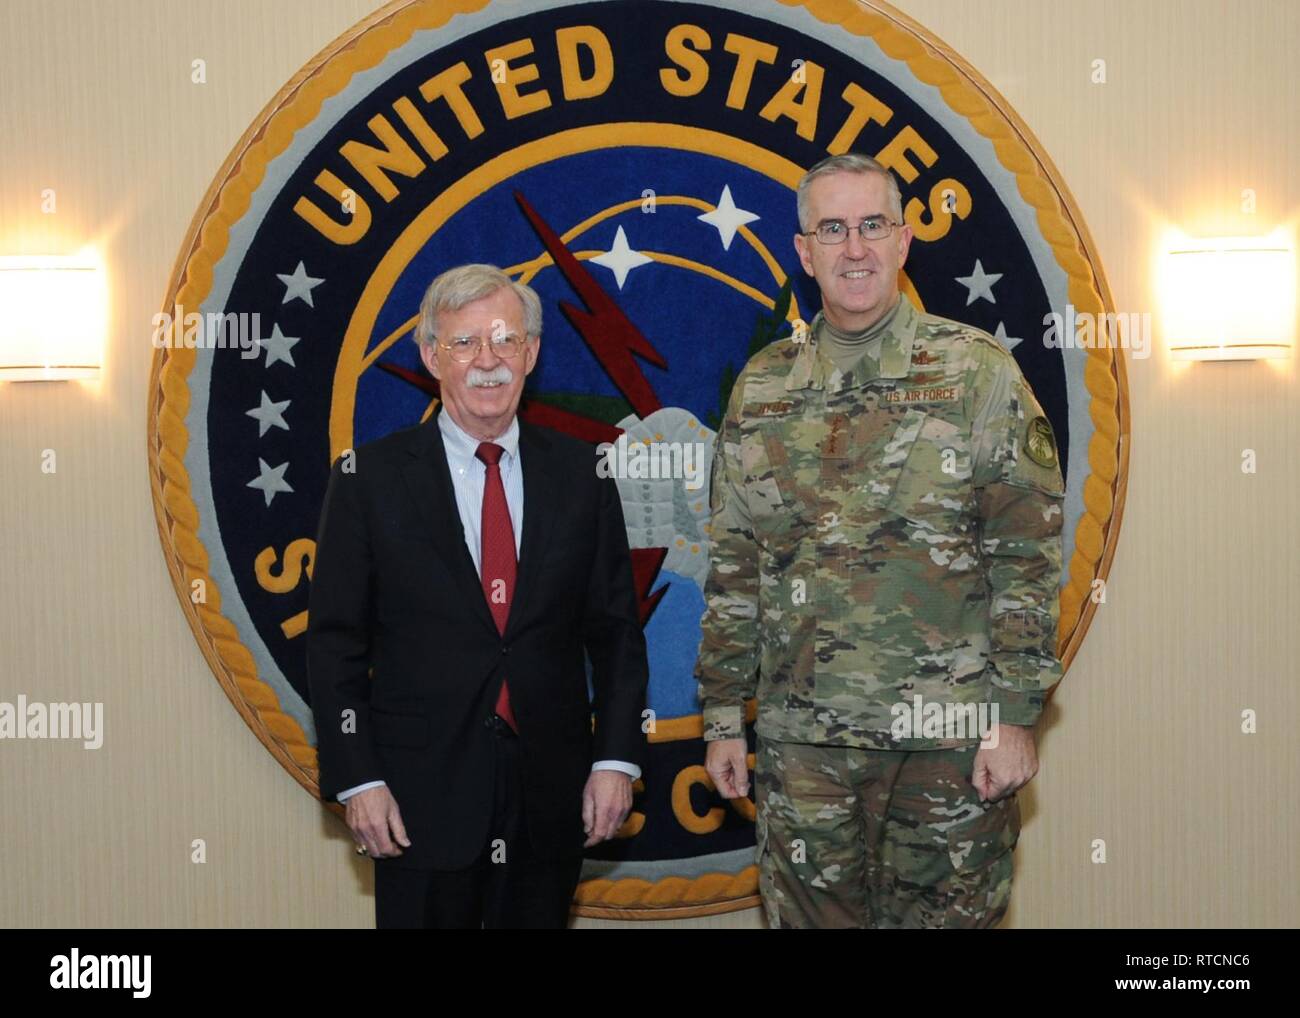 Ambassador John Bolton, National Security Advisor, meets with Air Force Gen. John Hyten, commander of United States Strategic Command (USSTRATCOM), during his trip to USSTRATCOM, Offutt Air Force Base, Neb., Feb. 14, 2019. The Ambassador observed USSTRATCOM’s combat-ready force, engaged in discussions with senior leaders and thanked warfighters for their service to the nation. Bolton’s visit also highlighted USSTRATCOM’s critical role in the National Security Strategy. Stock Photo